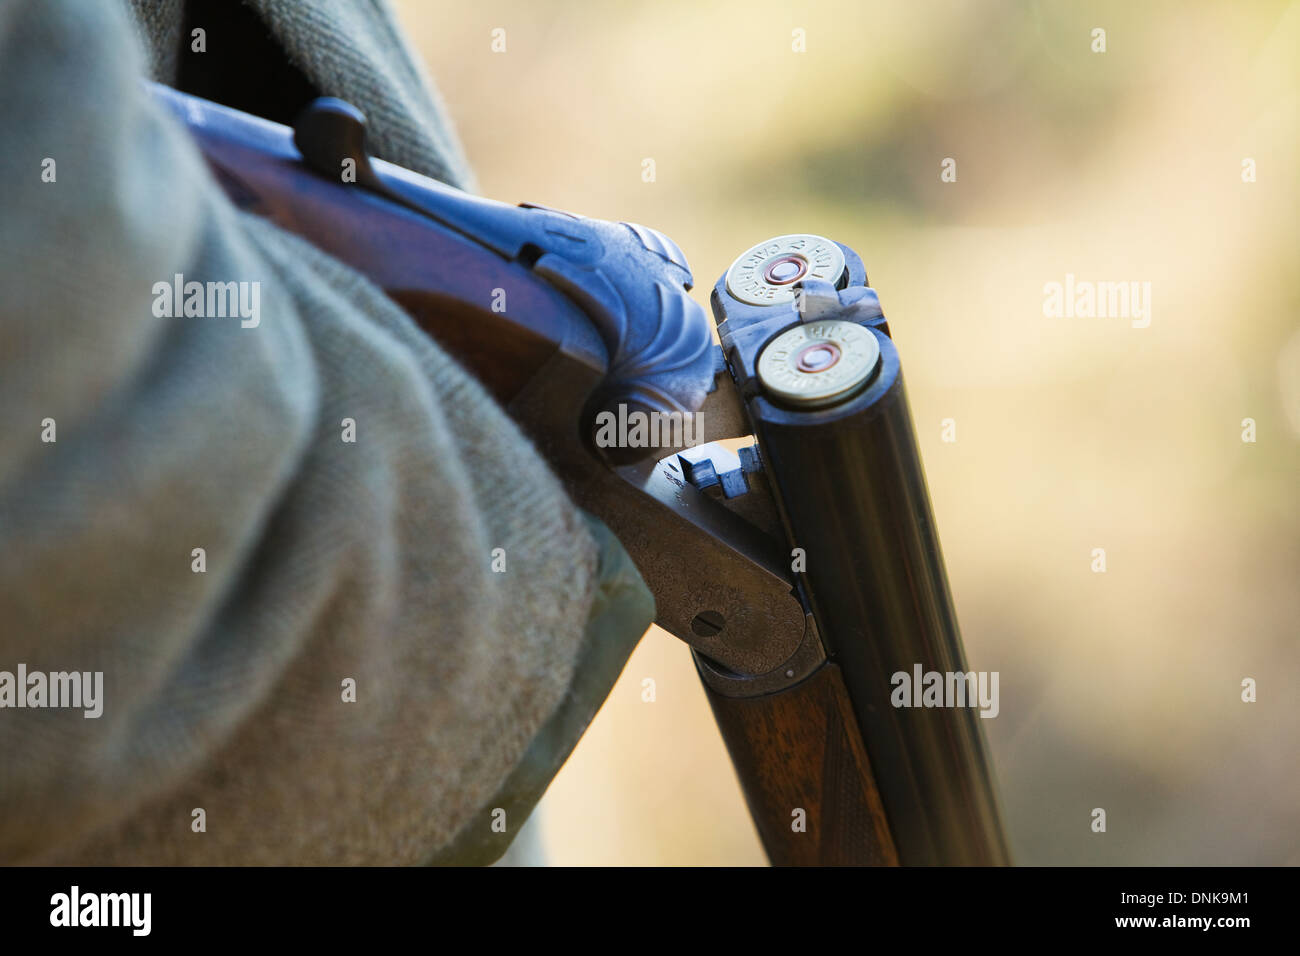 A man holding a 12 bore or gauge shotgun on a pheasant shoot in England Stock Photo